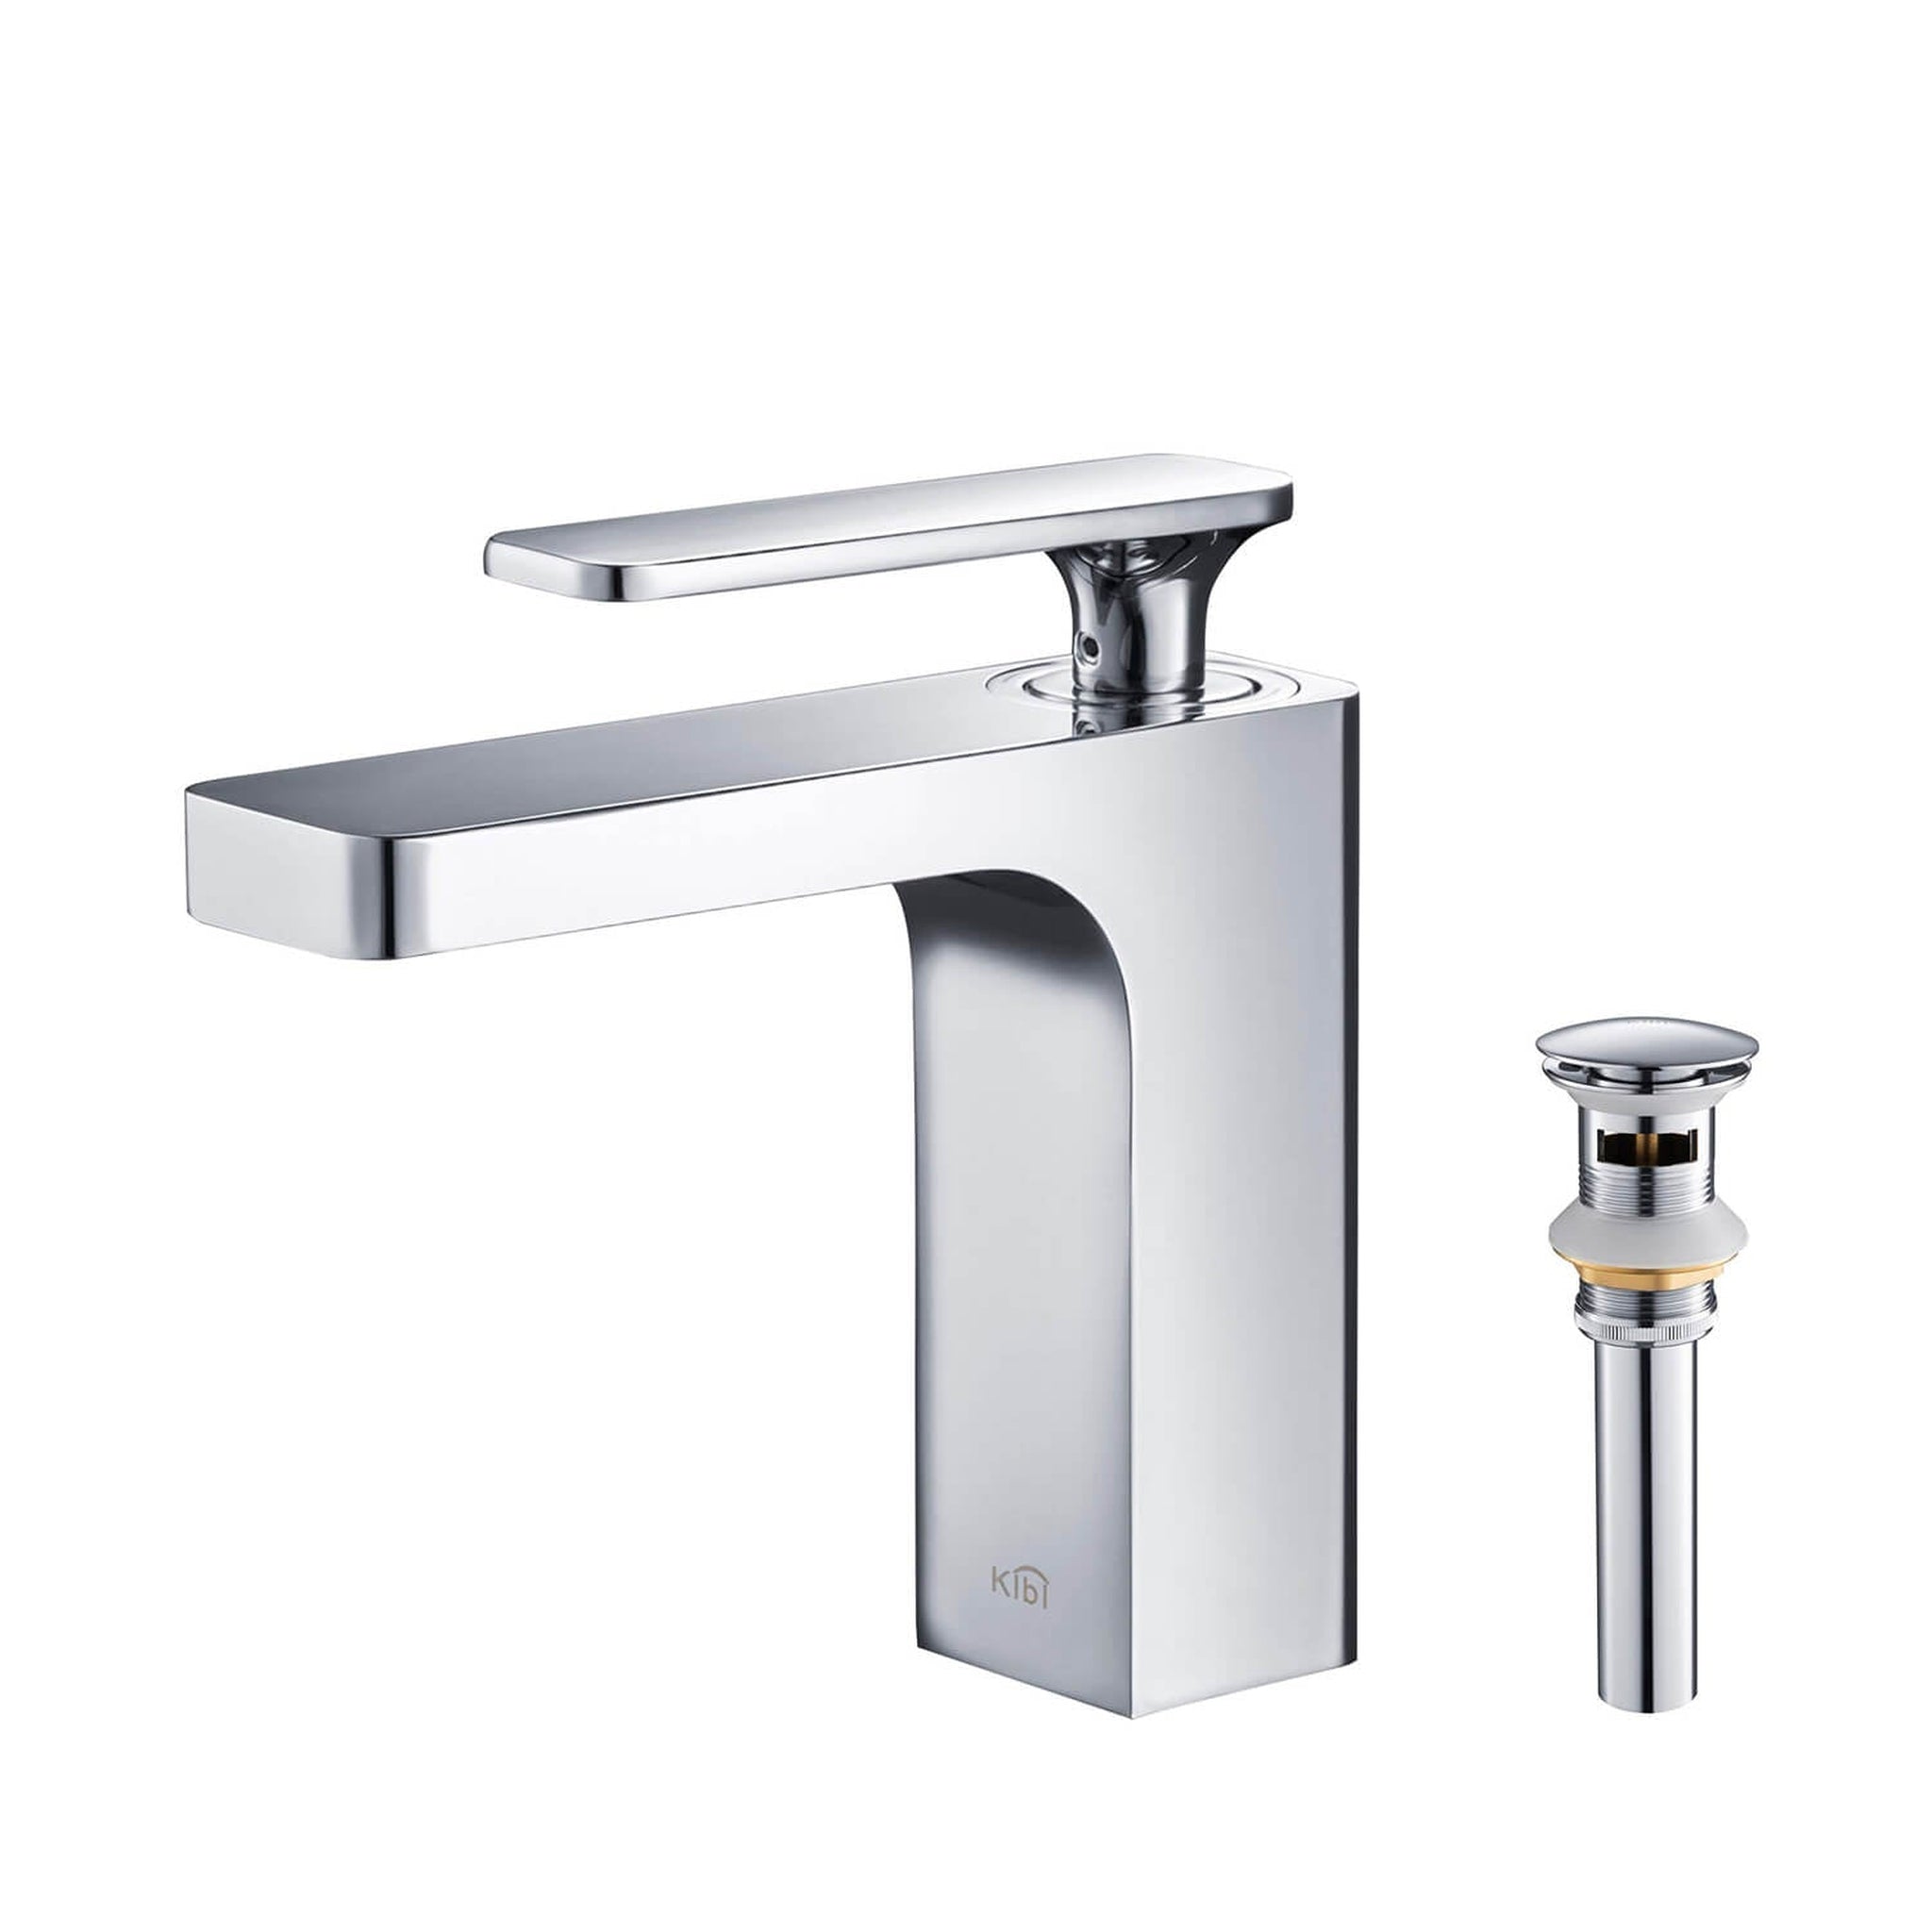 KIBI, KIBI Infinity Single Handle Chrome Solid Brass Bathroom Vanity Sink Faucet With Pop-Up Drain Stopper Small Cover With Overflow